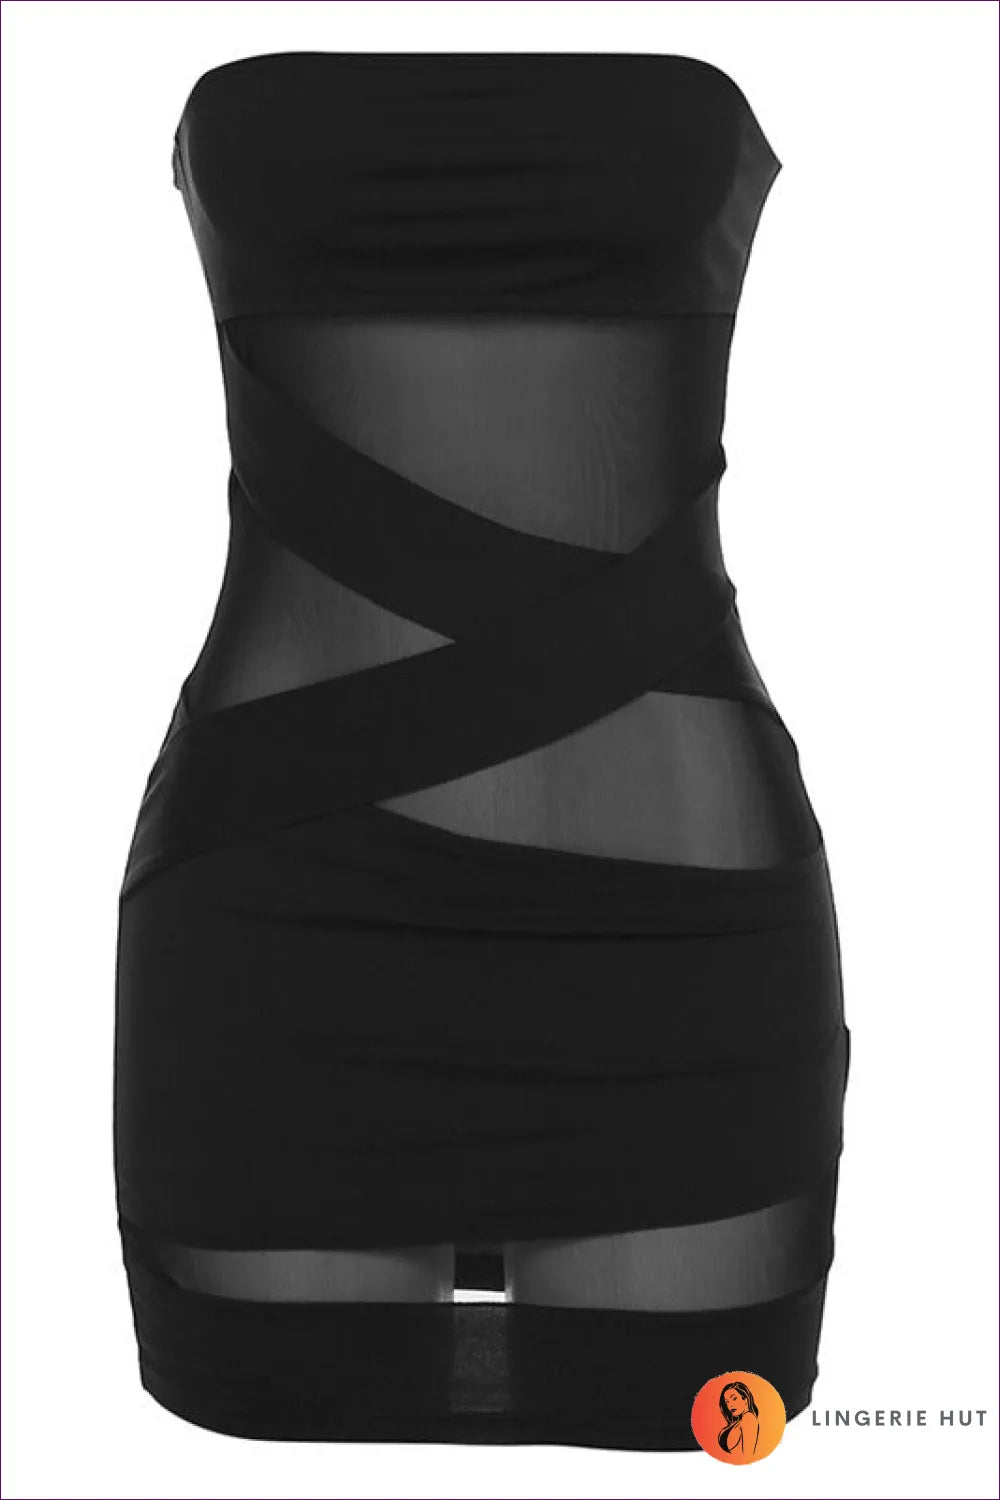 Get Ready To Shine Like a Star With Our Bandeau Sheer Wrap Mini Dress. Alluring Bandeau Neckline, Boning,